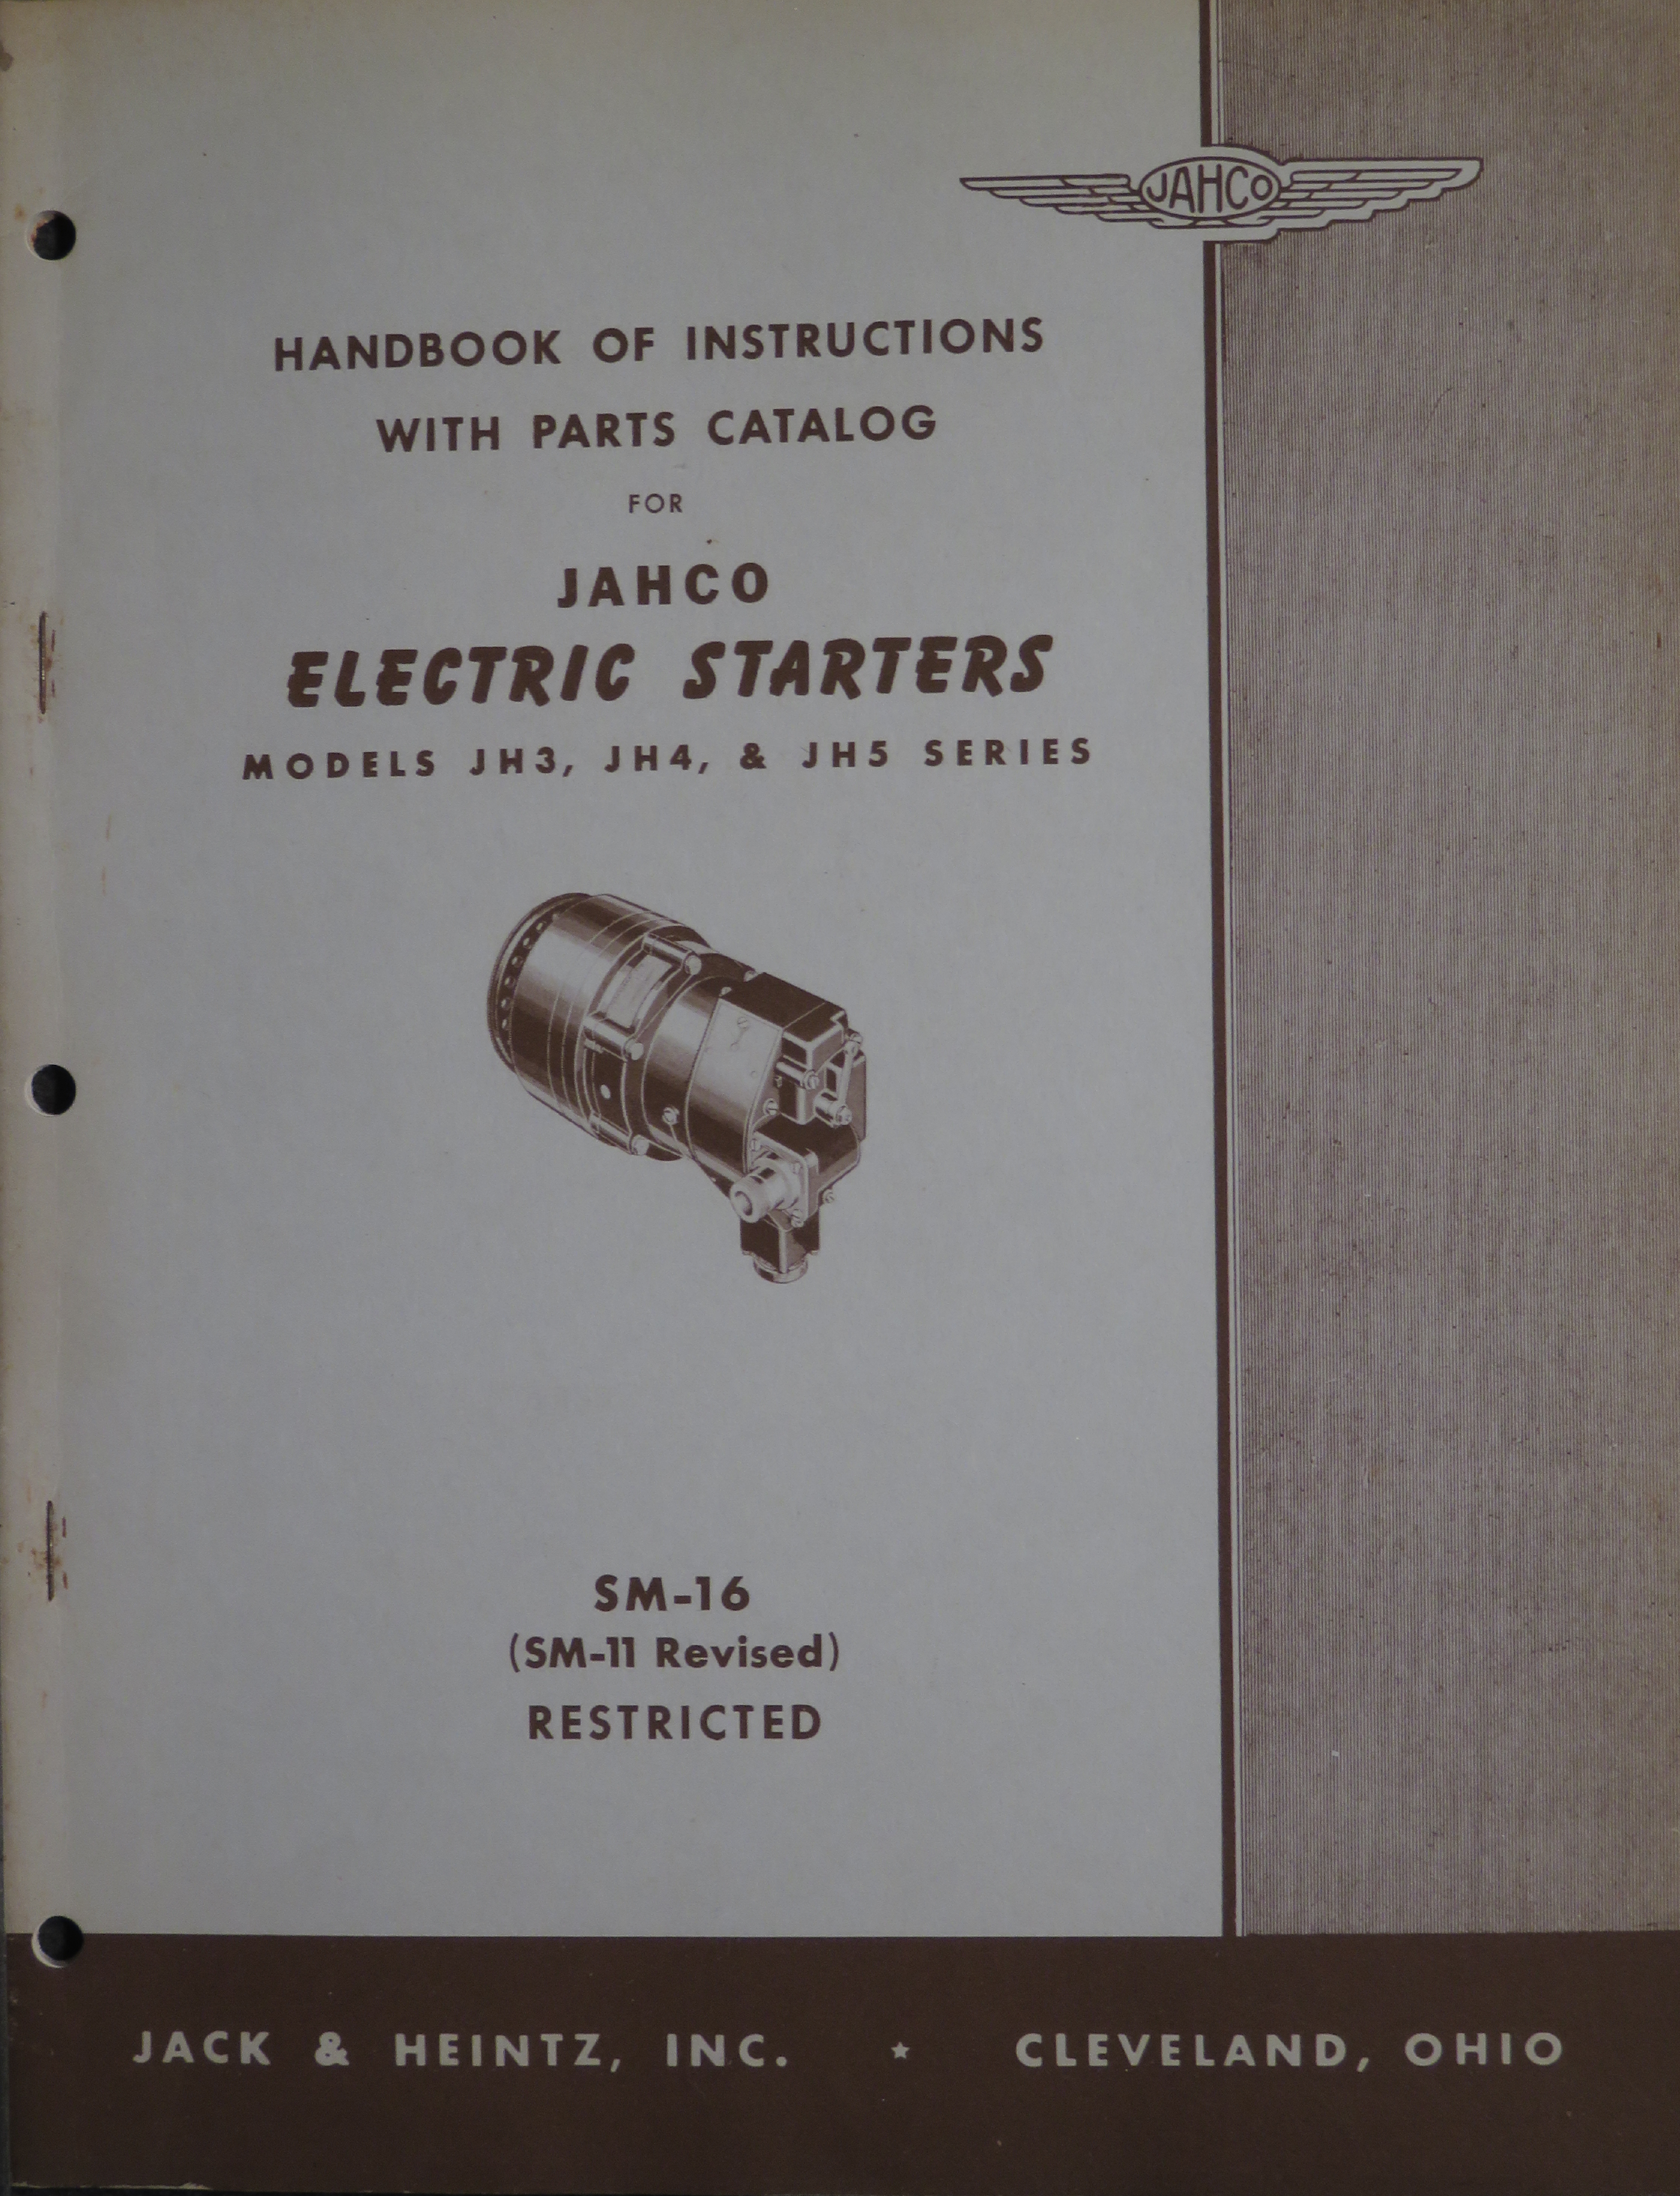 Sample page 1 from AirCorps Library document: Handbook of Instructions with Parts Catalog for Jahco Electric Starters Models JH3, JH4, and JH5 Series